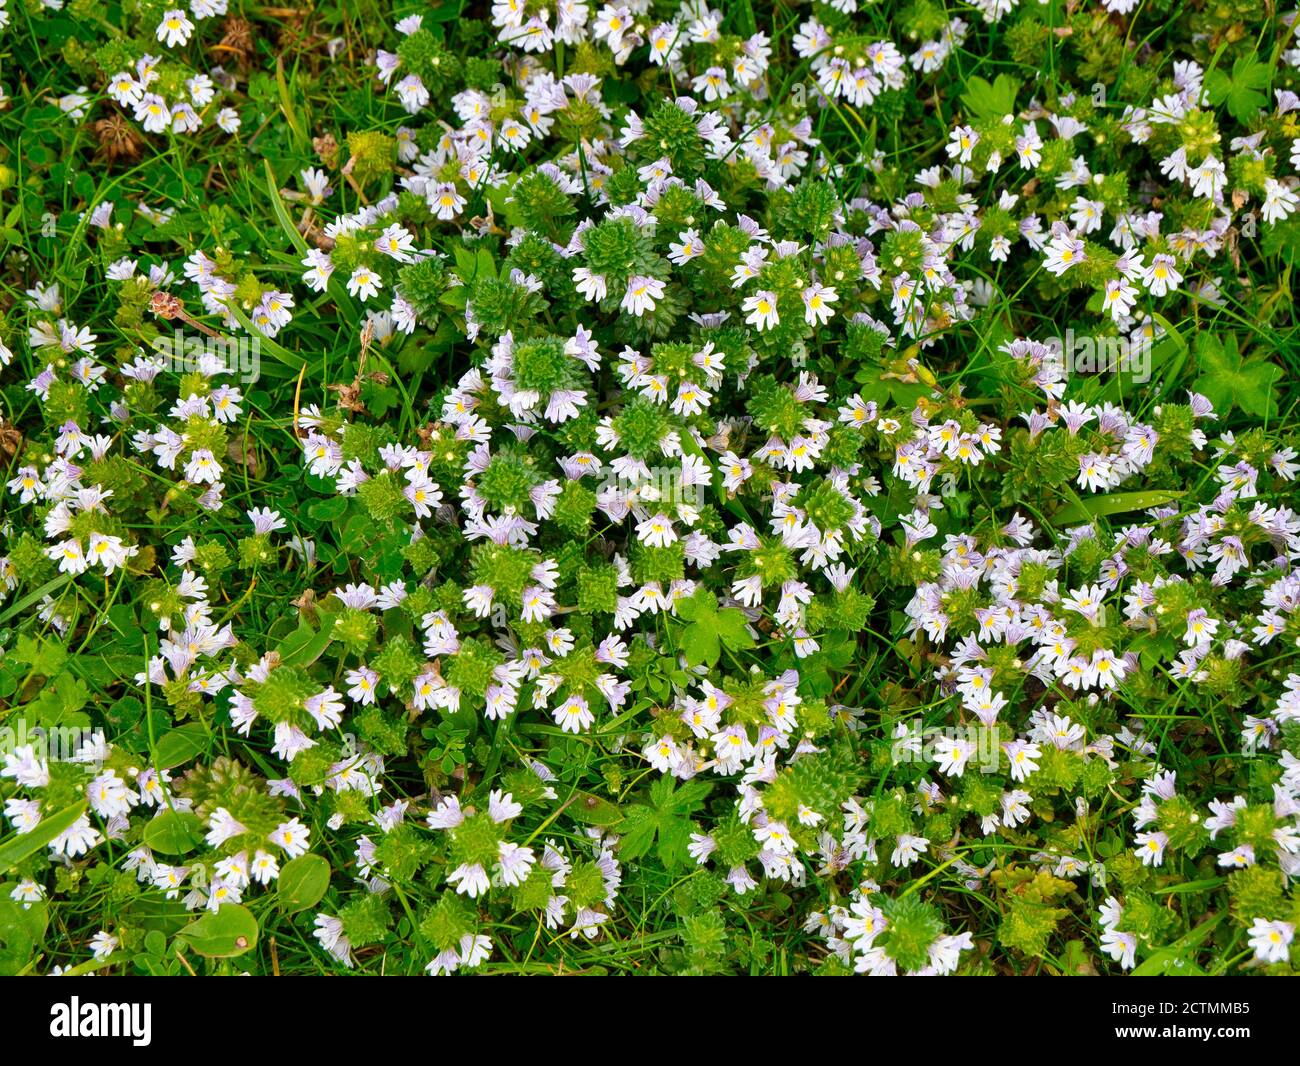 Close up of flowers of Eyebright (euphrasia officinalis) taken near Breckon on the island of Yell in Shetland, UK in summer. Stock Photo